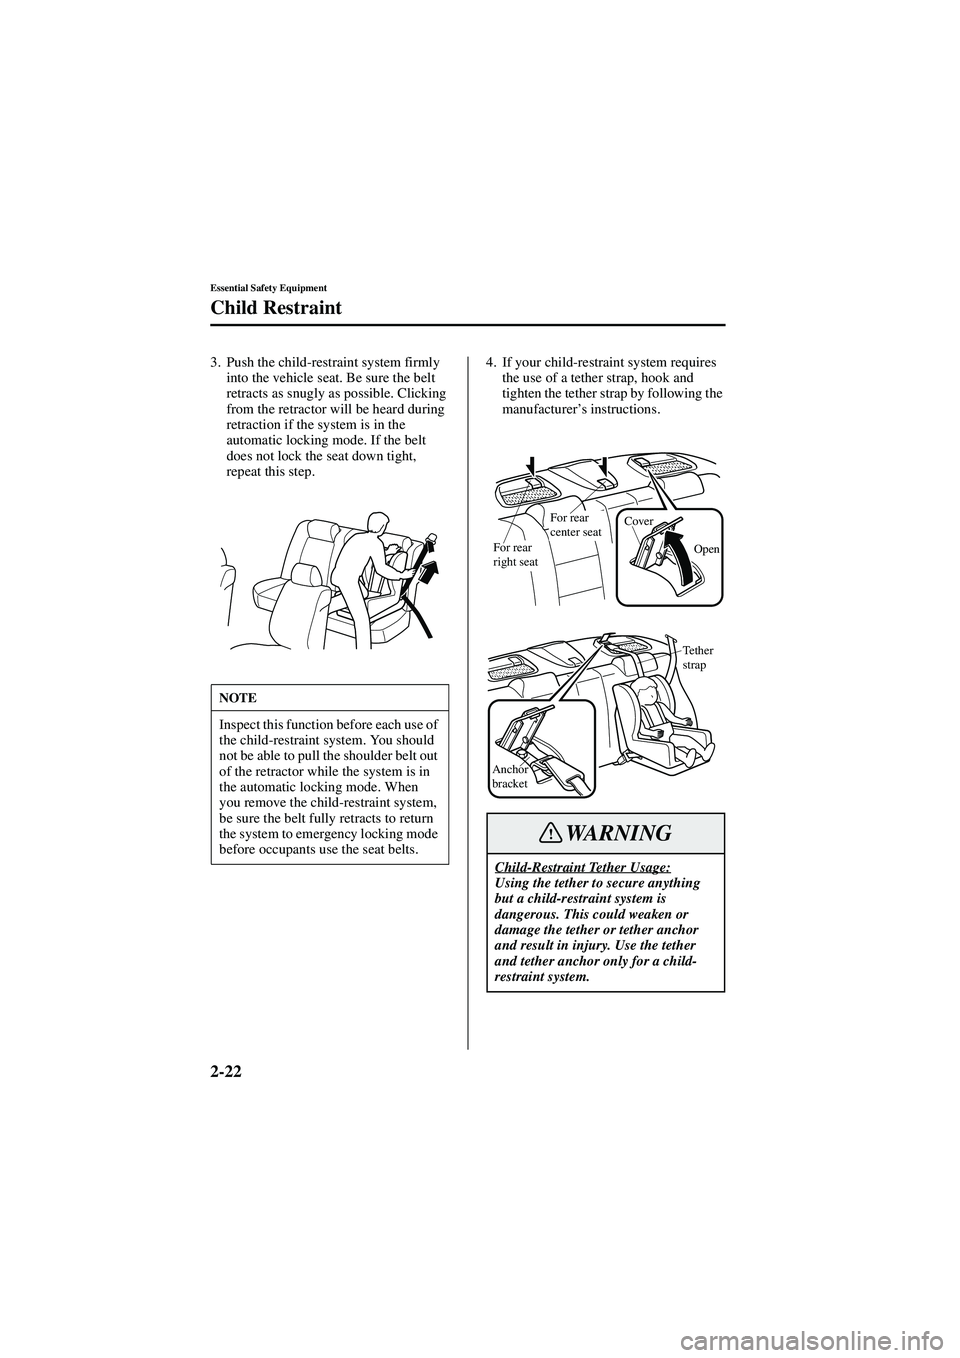 MAZDA MODEL 626 2002  Owners Manual 2-22
Essential Safety Equipment
Child Restraint
Form No. 8Q50-EA-01G
3. Push the child-restraint system firmly into the vehicle seat. Be sure the belt 
retracts as snugly as possible. Clicking 
from t